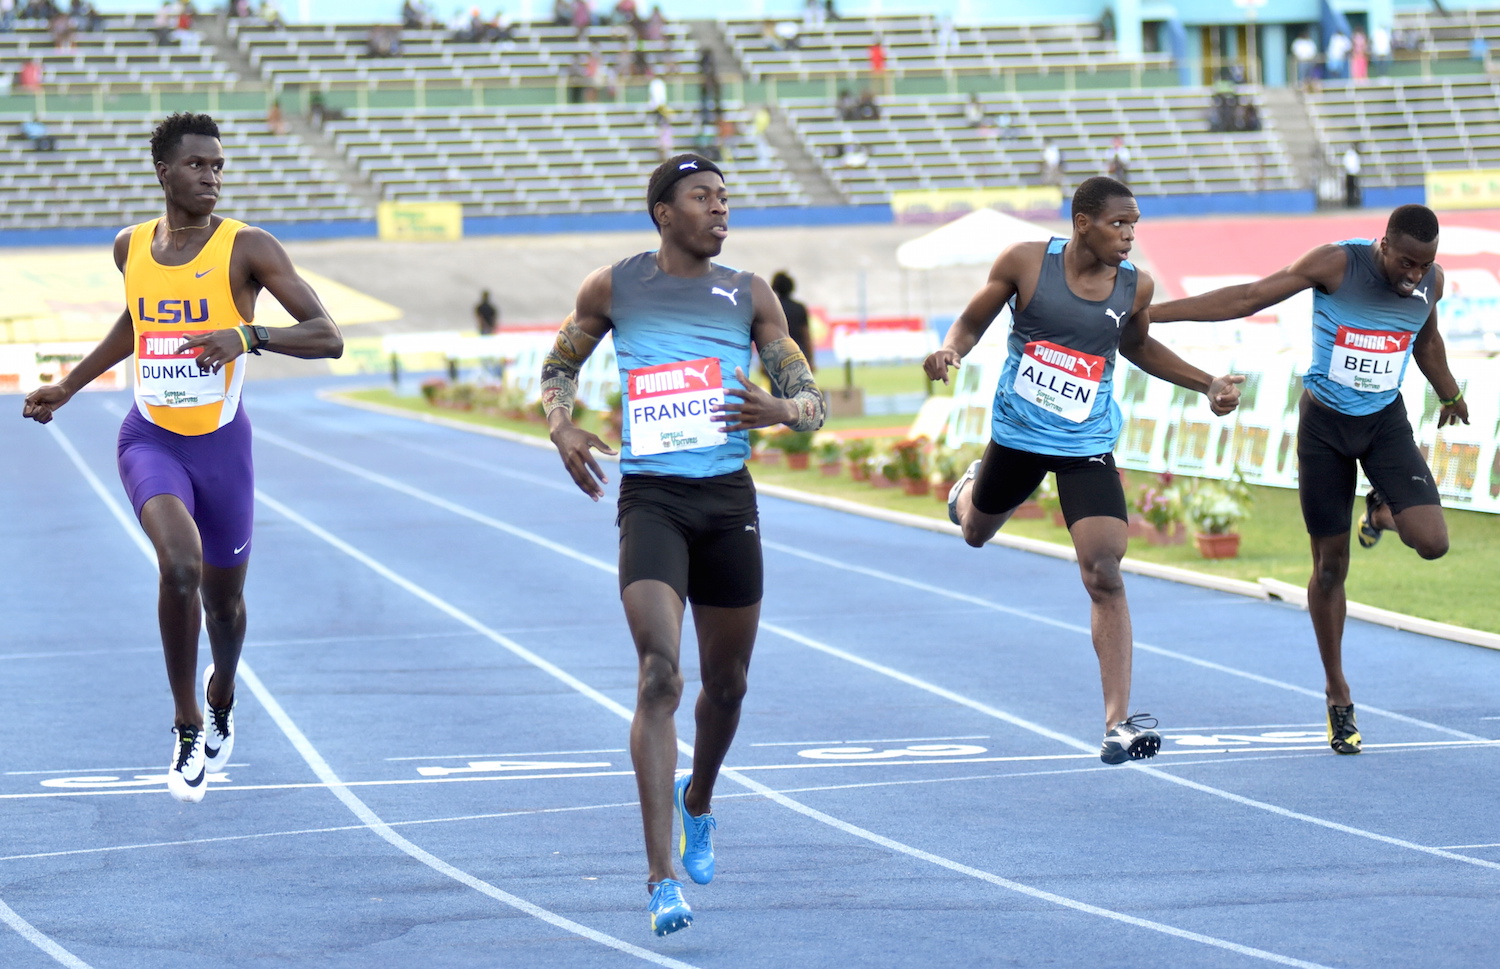 Javon Francis In Last Ditch Effort To Qualify For Doha 2019